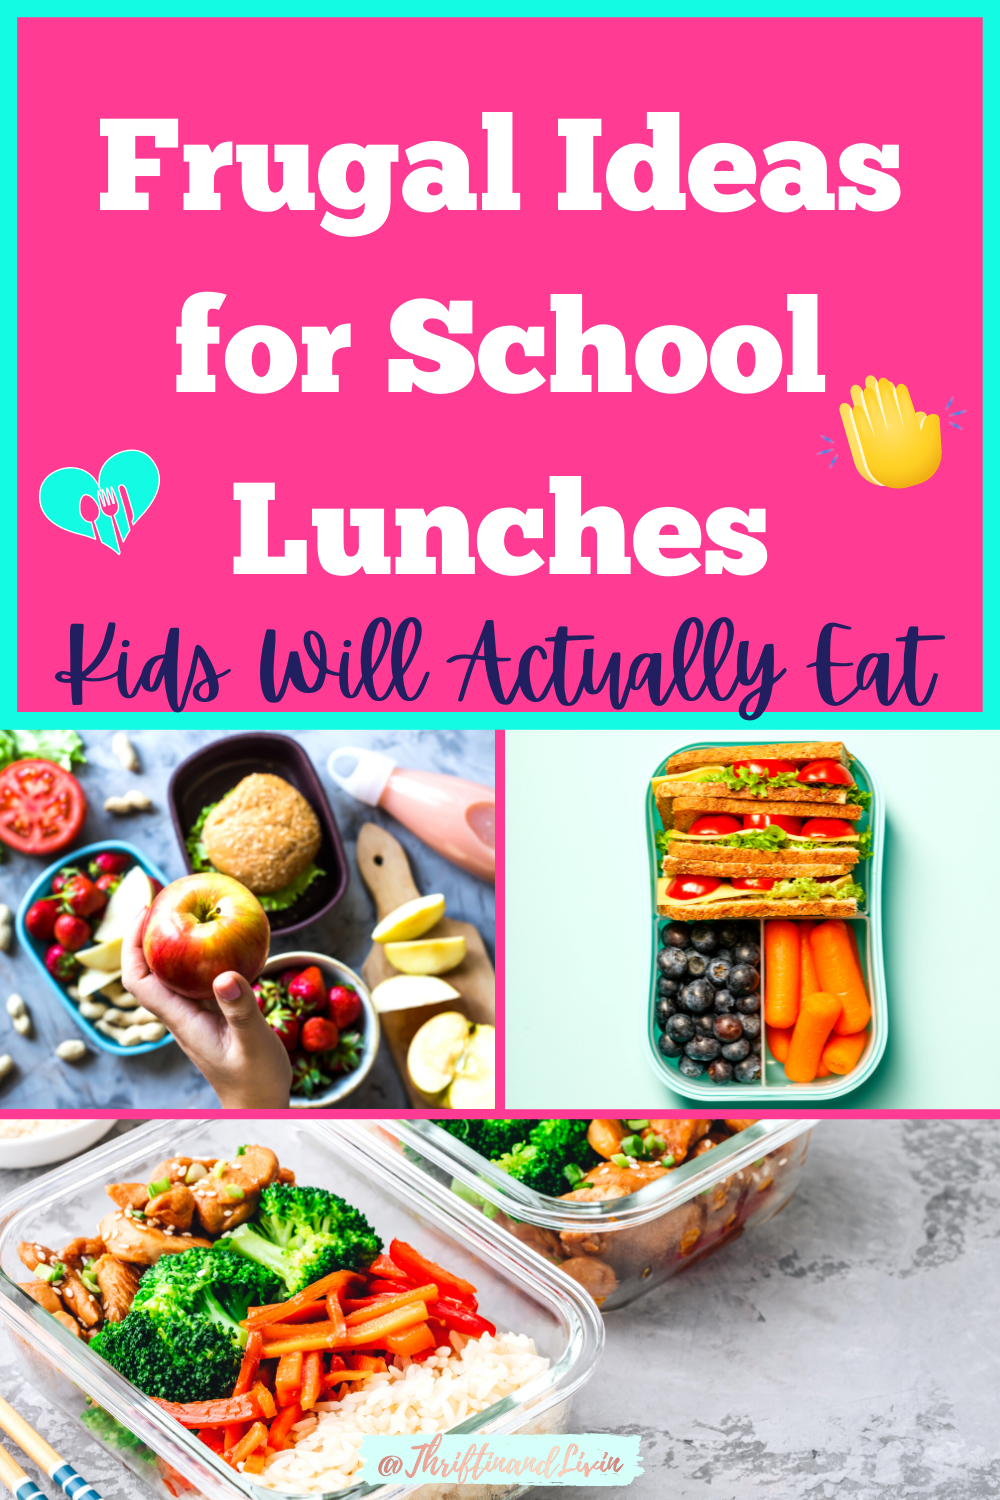 11+ Frugal Ideas for School Lunches Kids Will Actually Eat | Thriftin ...